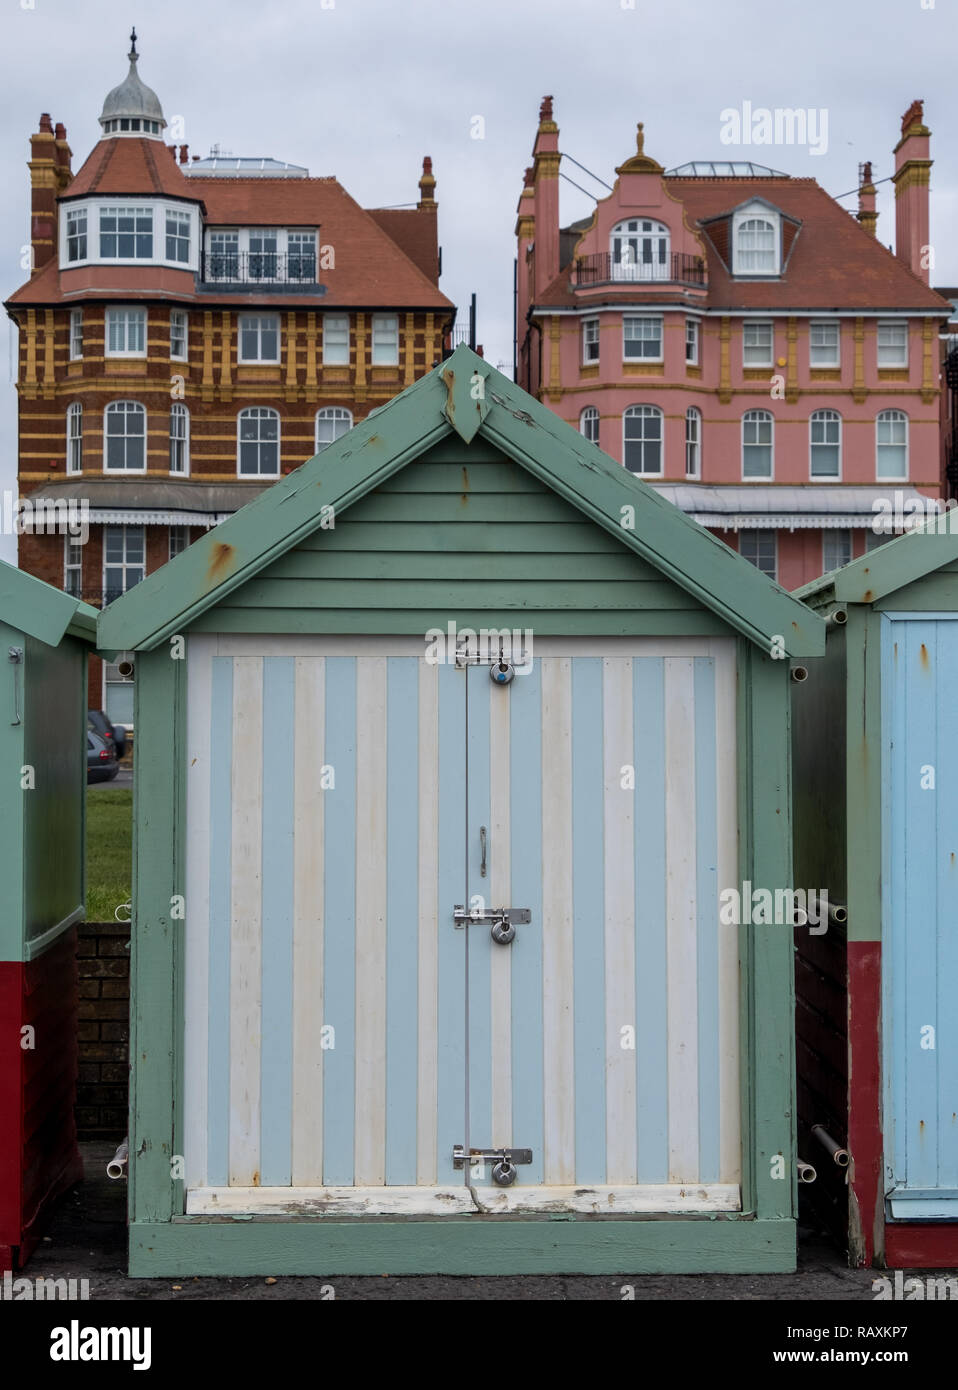 Colourful beach huts on the promenade at Hove Gardens, East Sussex